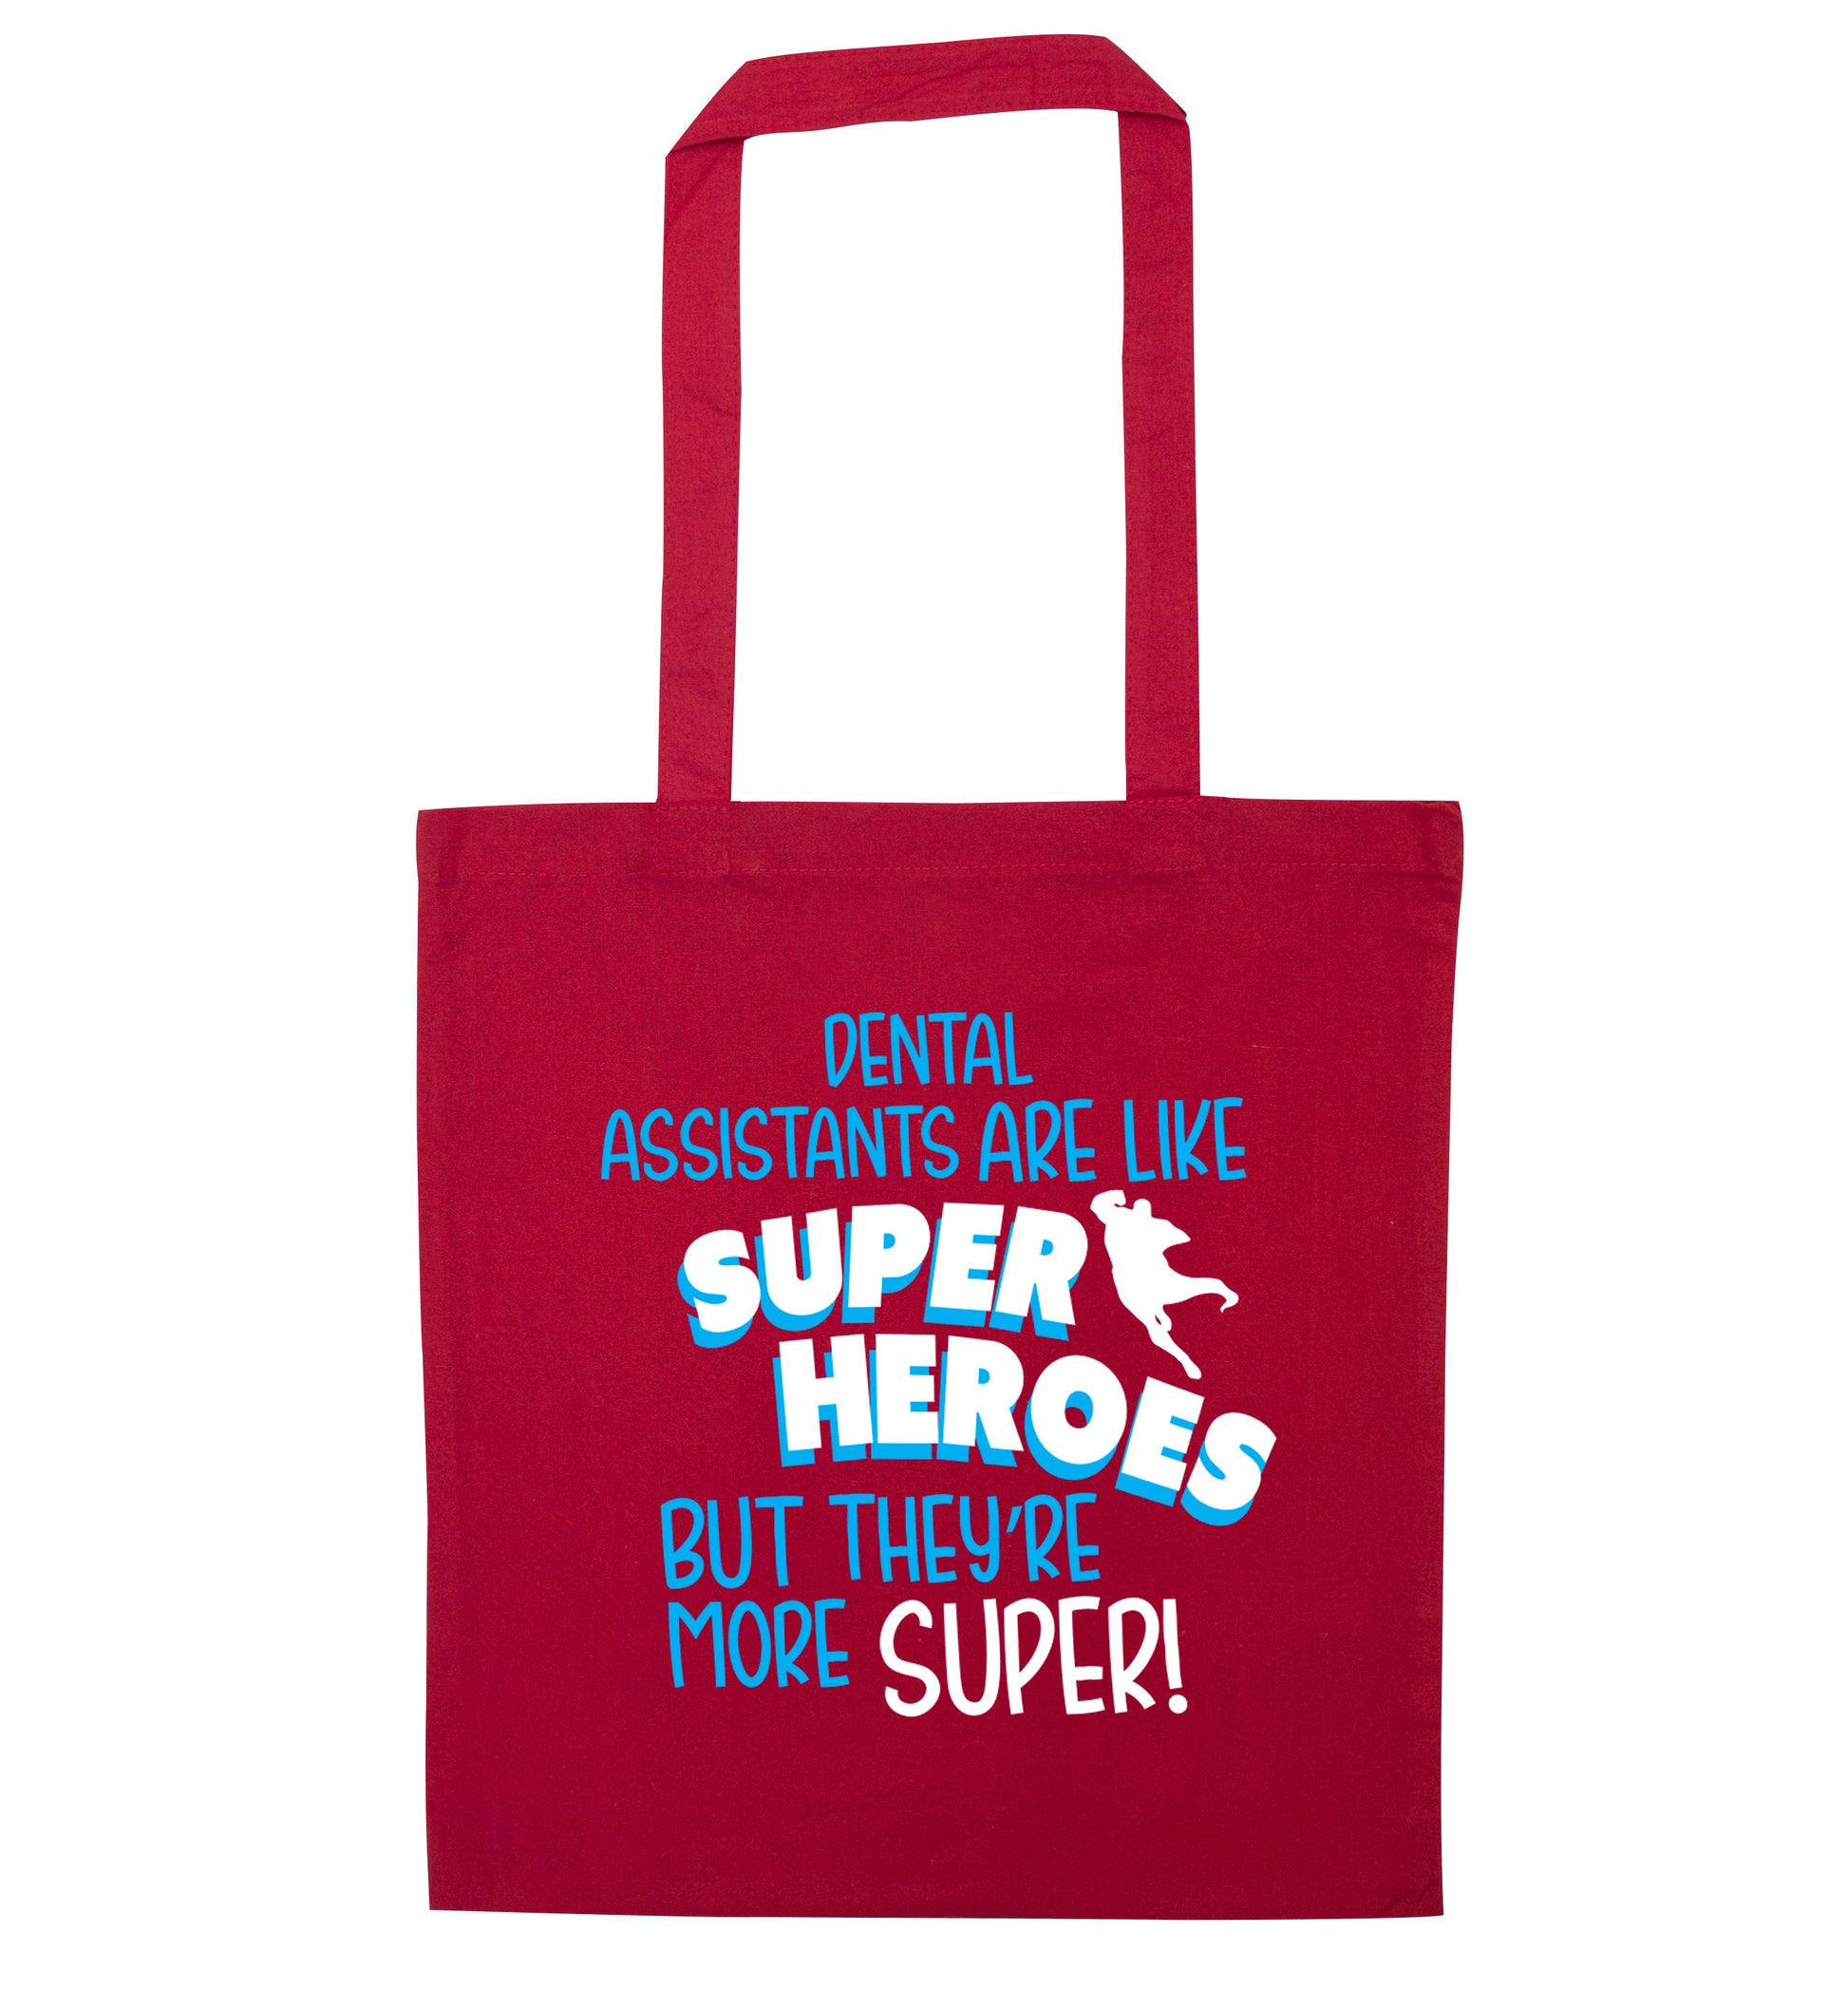 Dental Assistants are like superheros but they're more super red tote bag